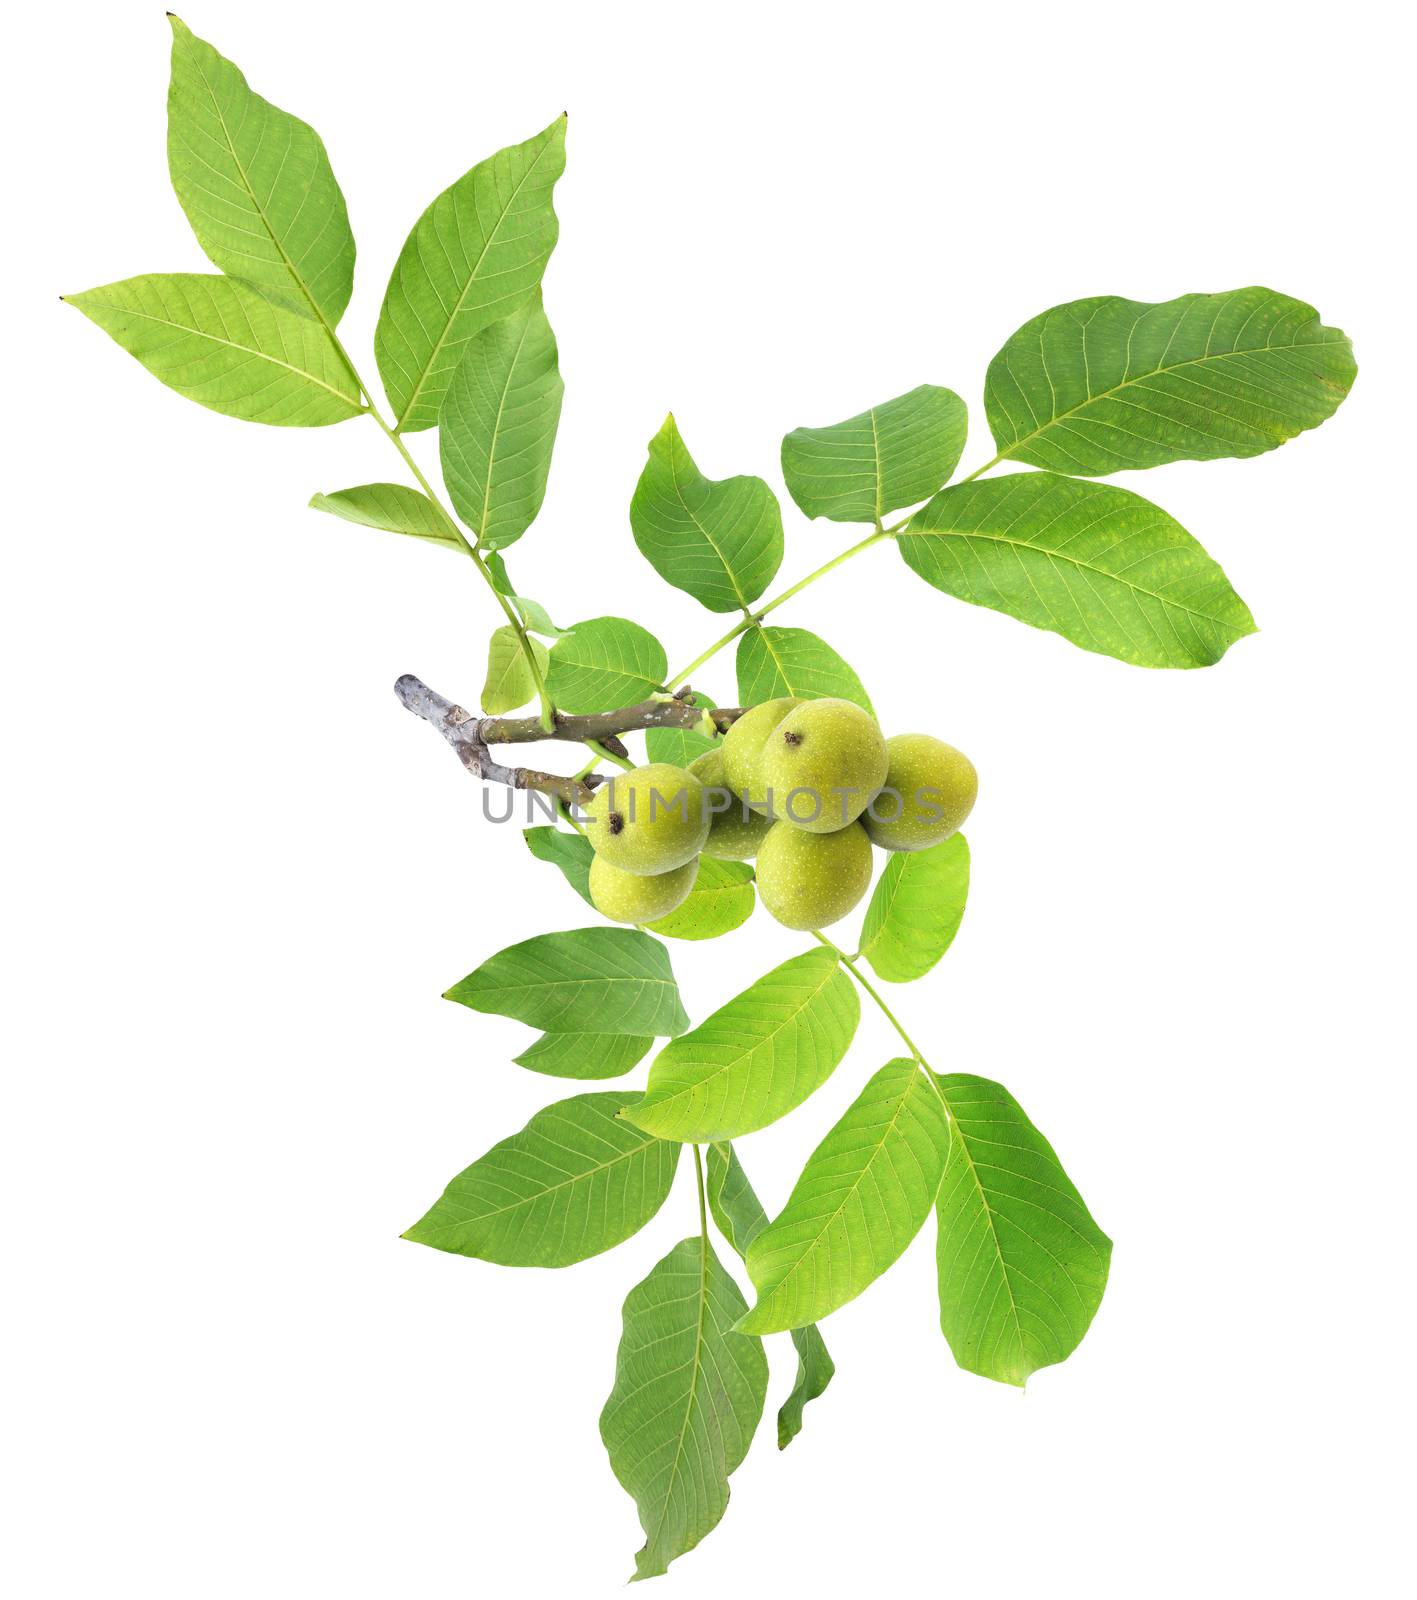 Walnut tree. Green branch isolated on white background with clipping path by xamtiw